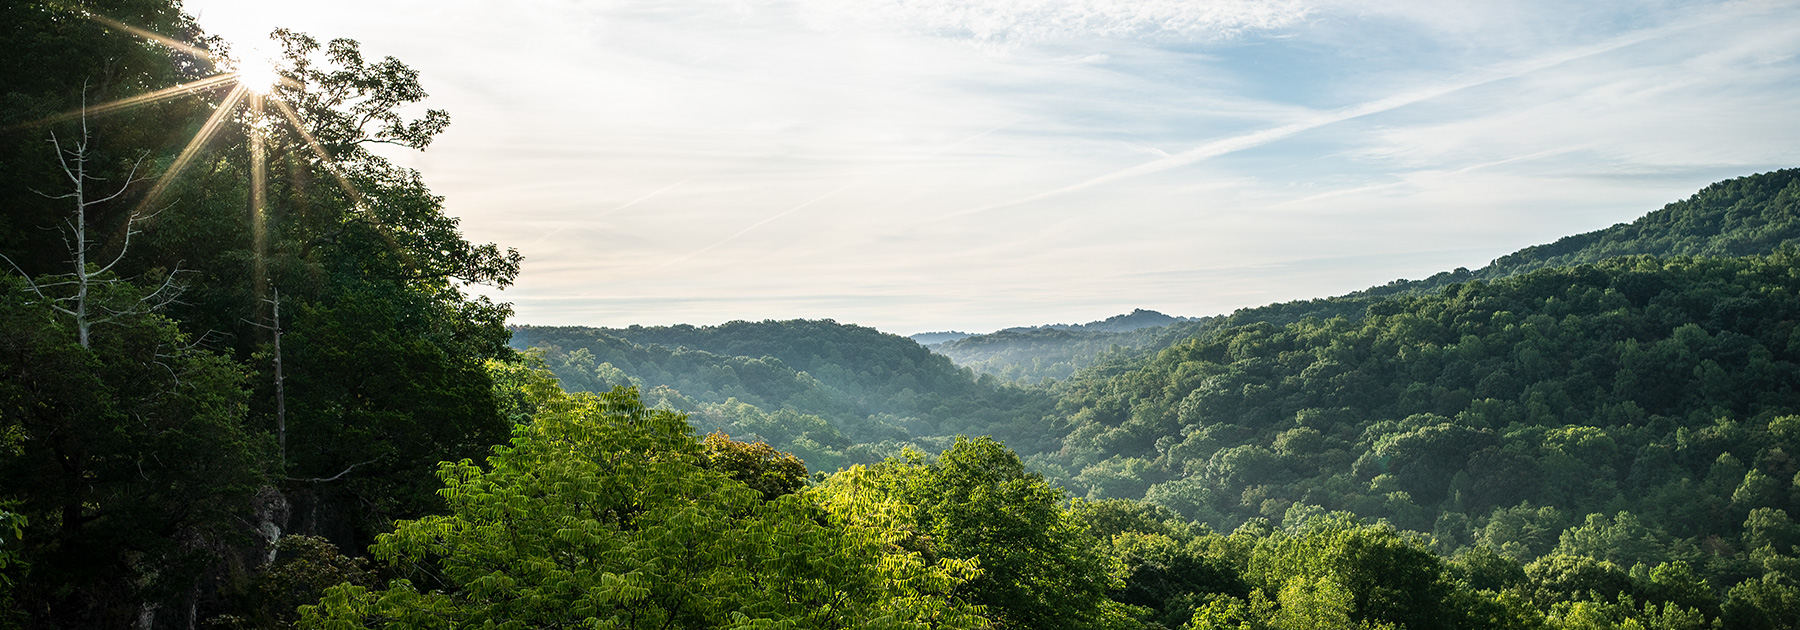 photo from the Edge of Appalachia Preserve System